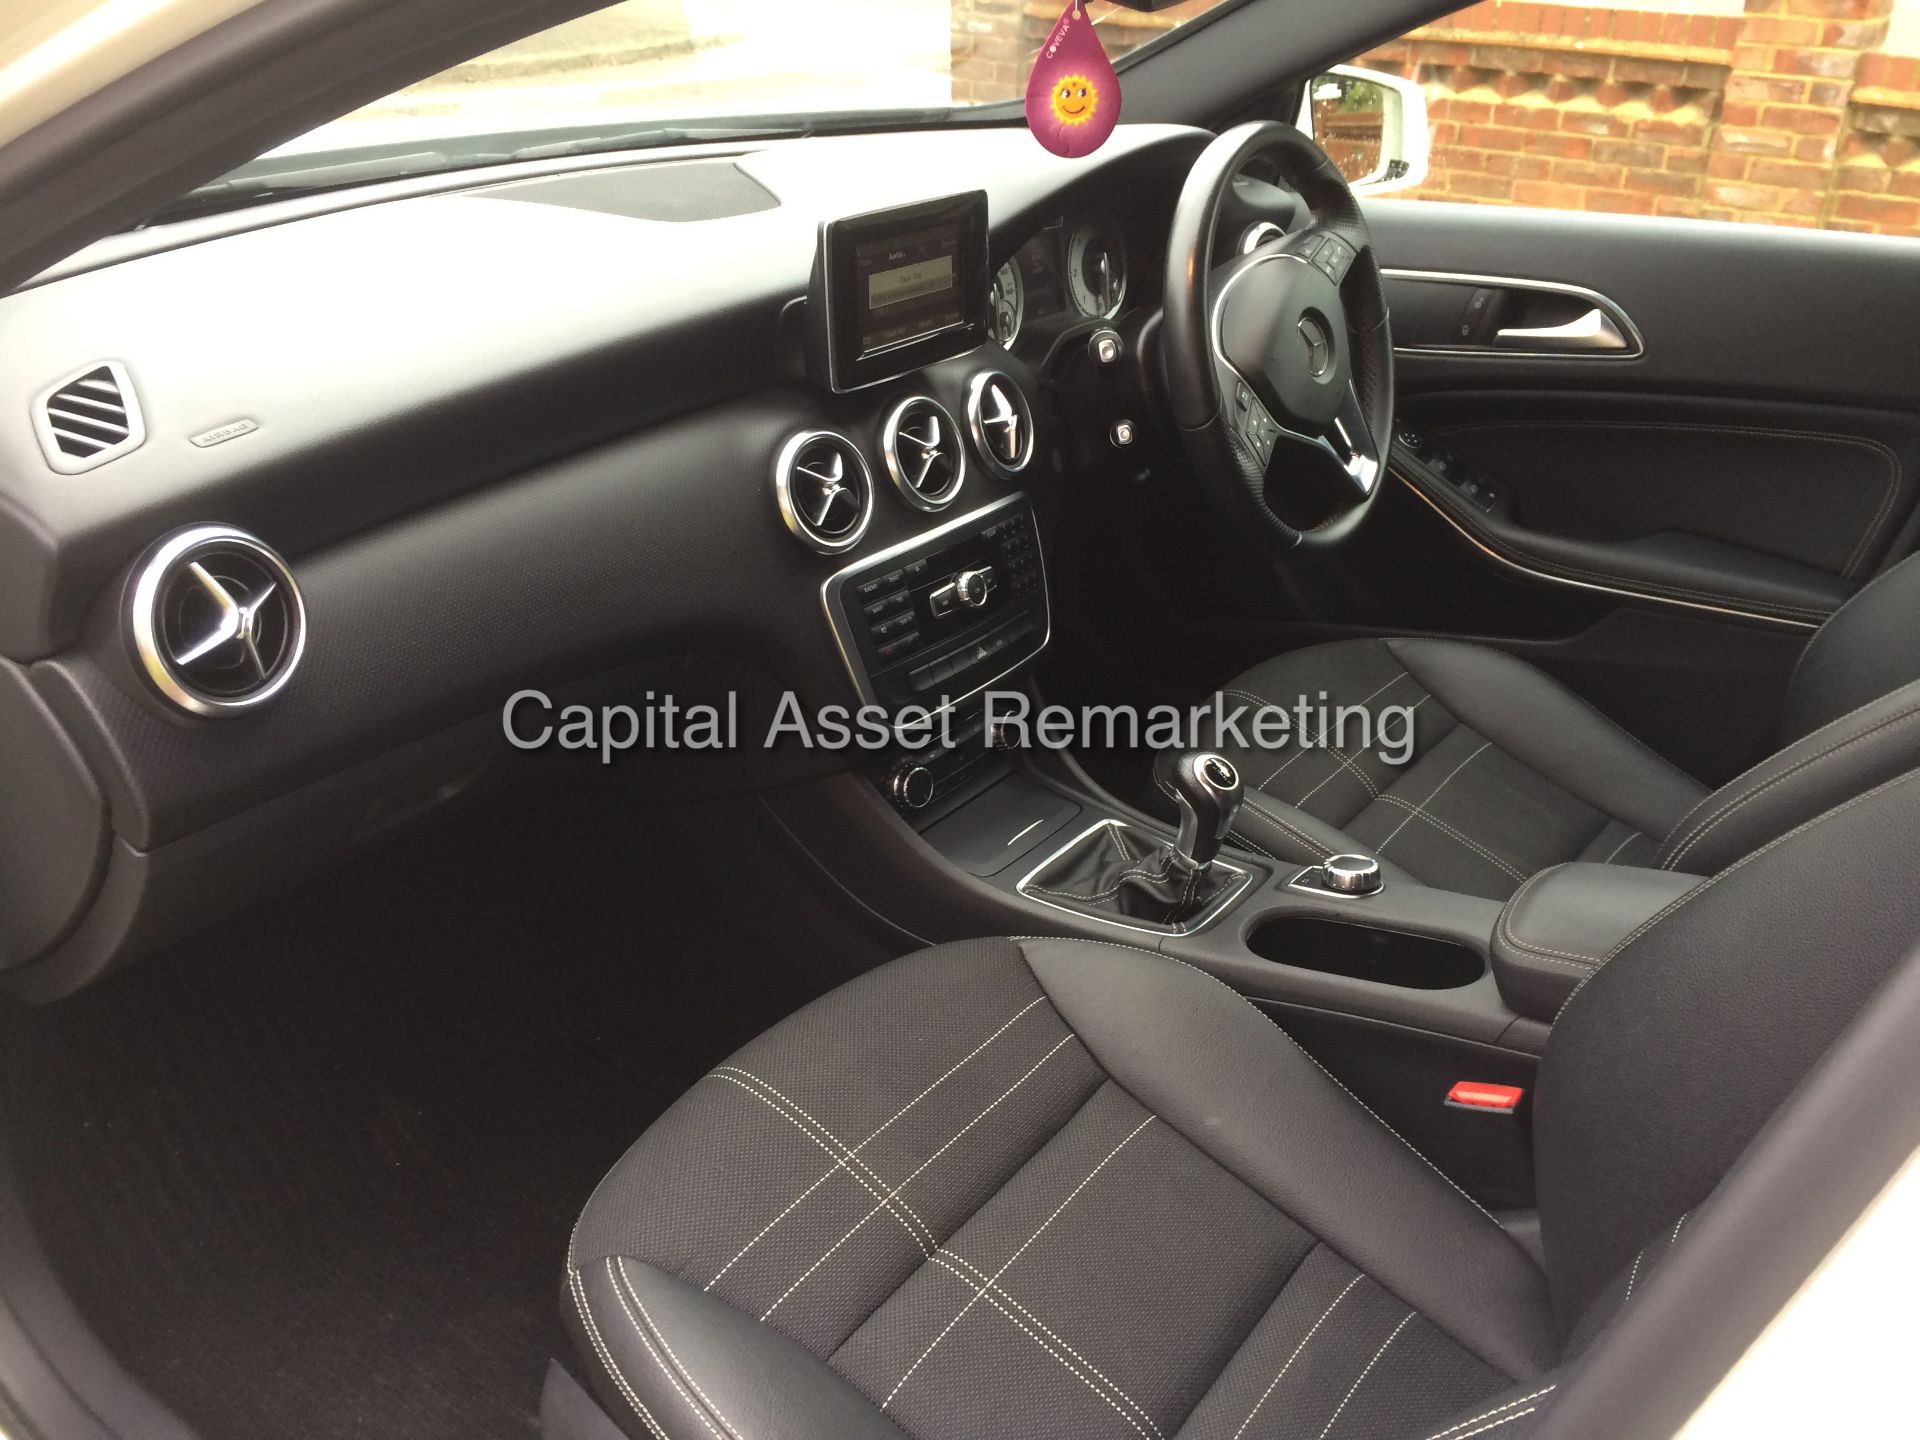 (On Sale) MERCEDES A180cdi "SPORT EDITION" (2015 MODEL) ONLY 25,000 MILES - SAT NAV -PARTIAL LEATHER - Image 11 of 18